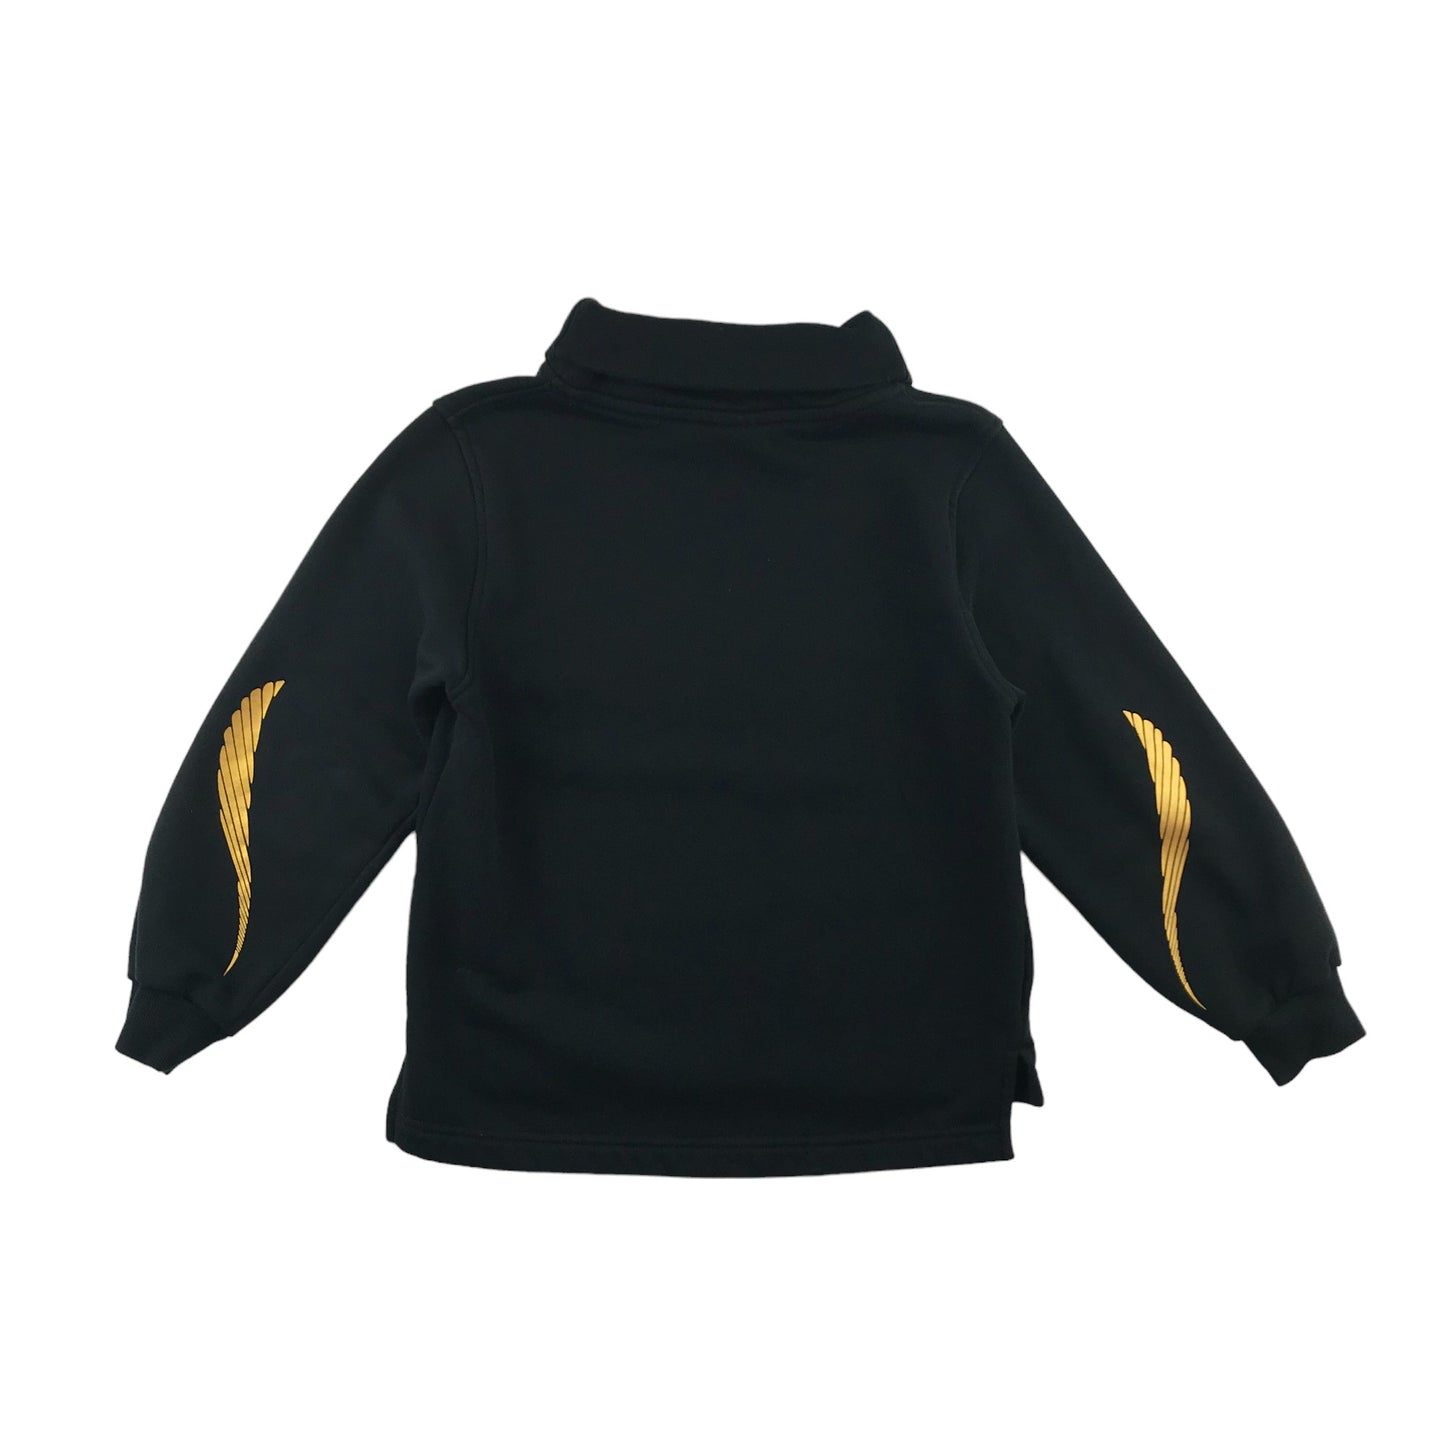 Nike sweater 10-11 years black turtle neck gold logo and details